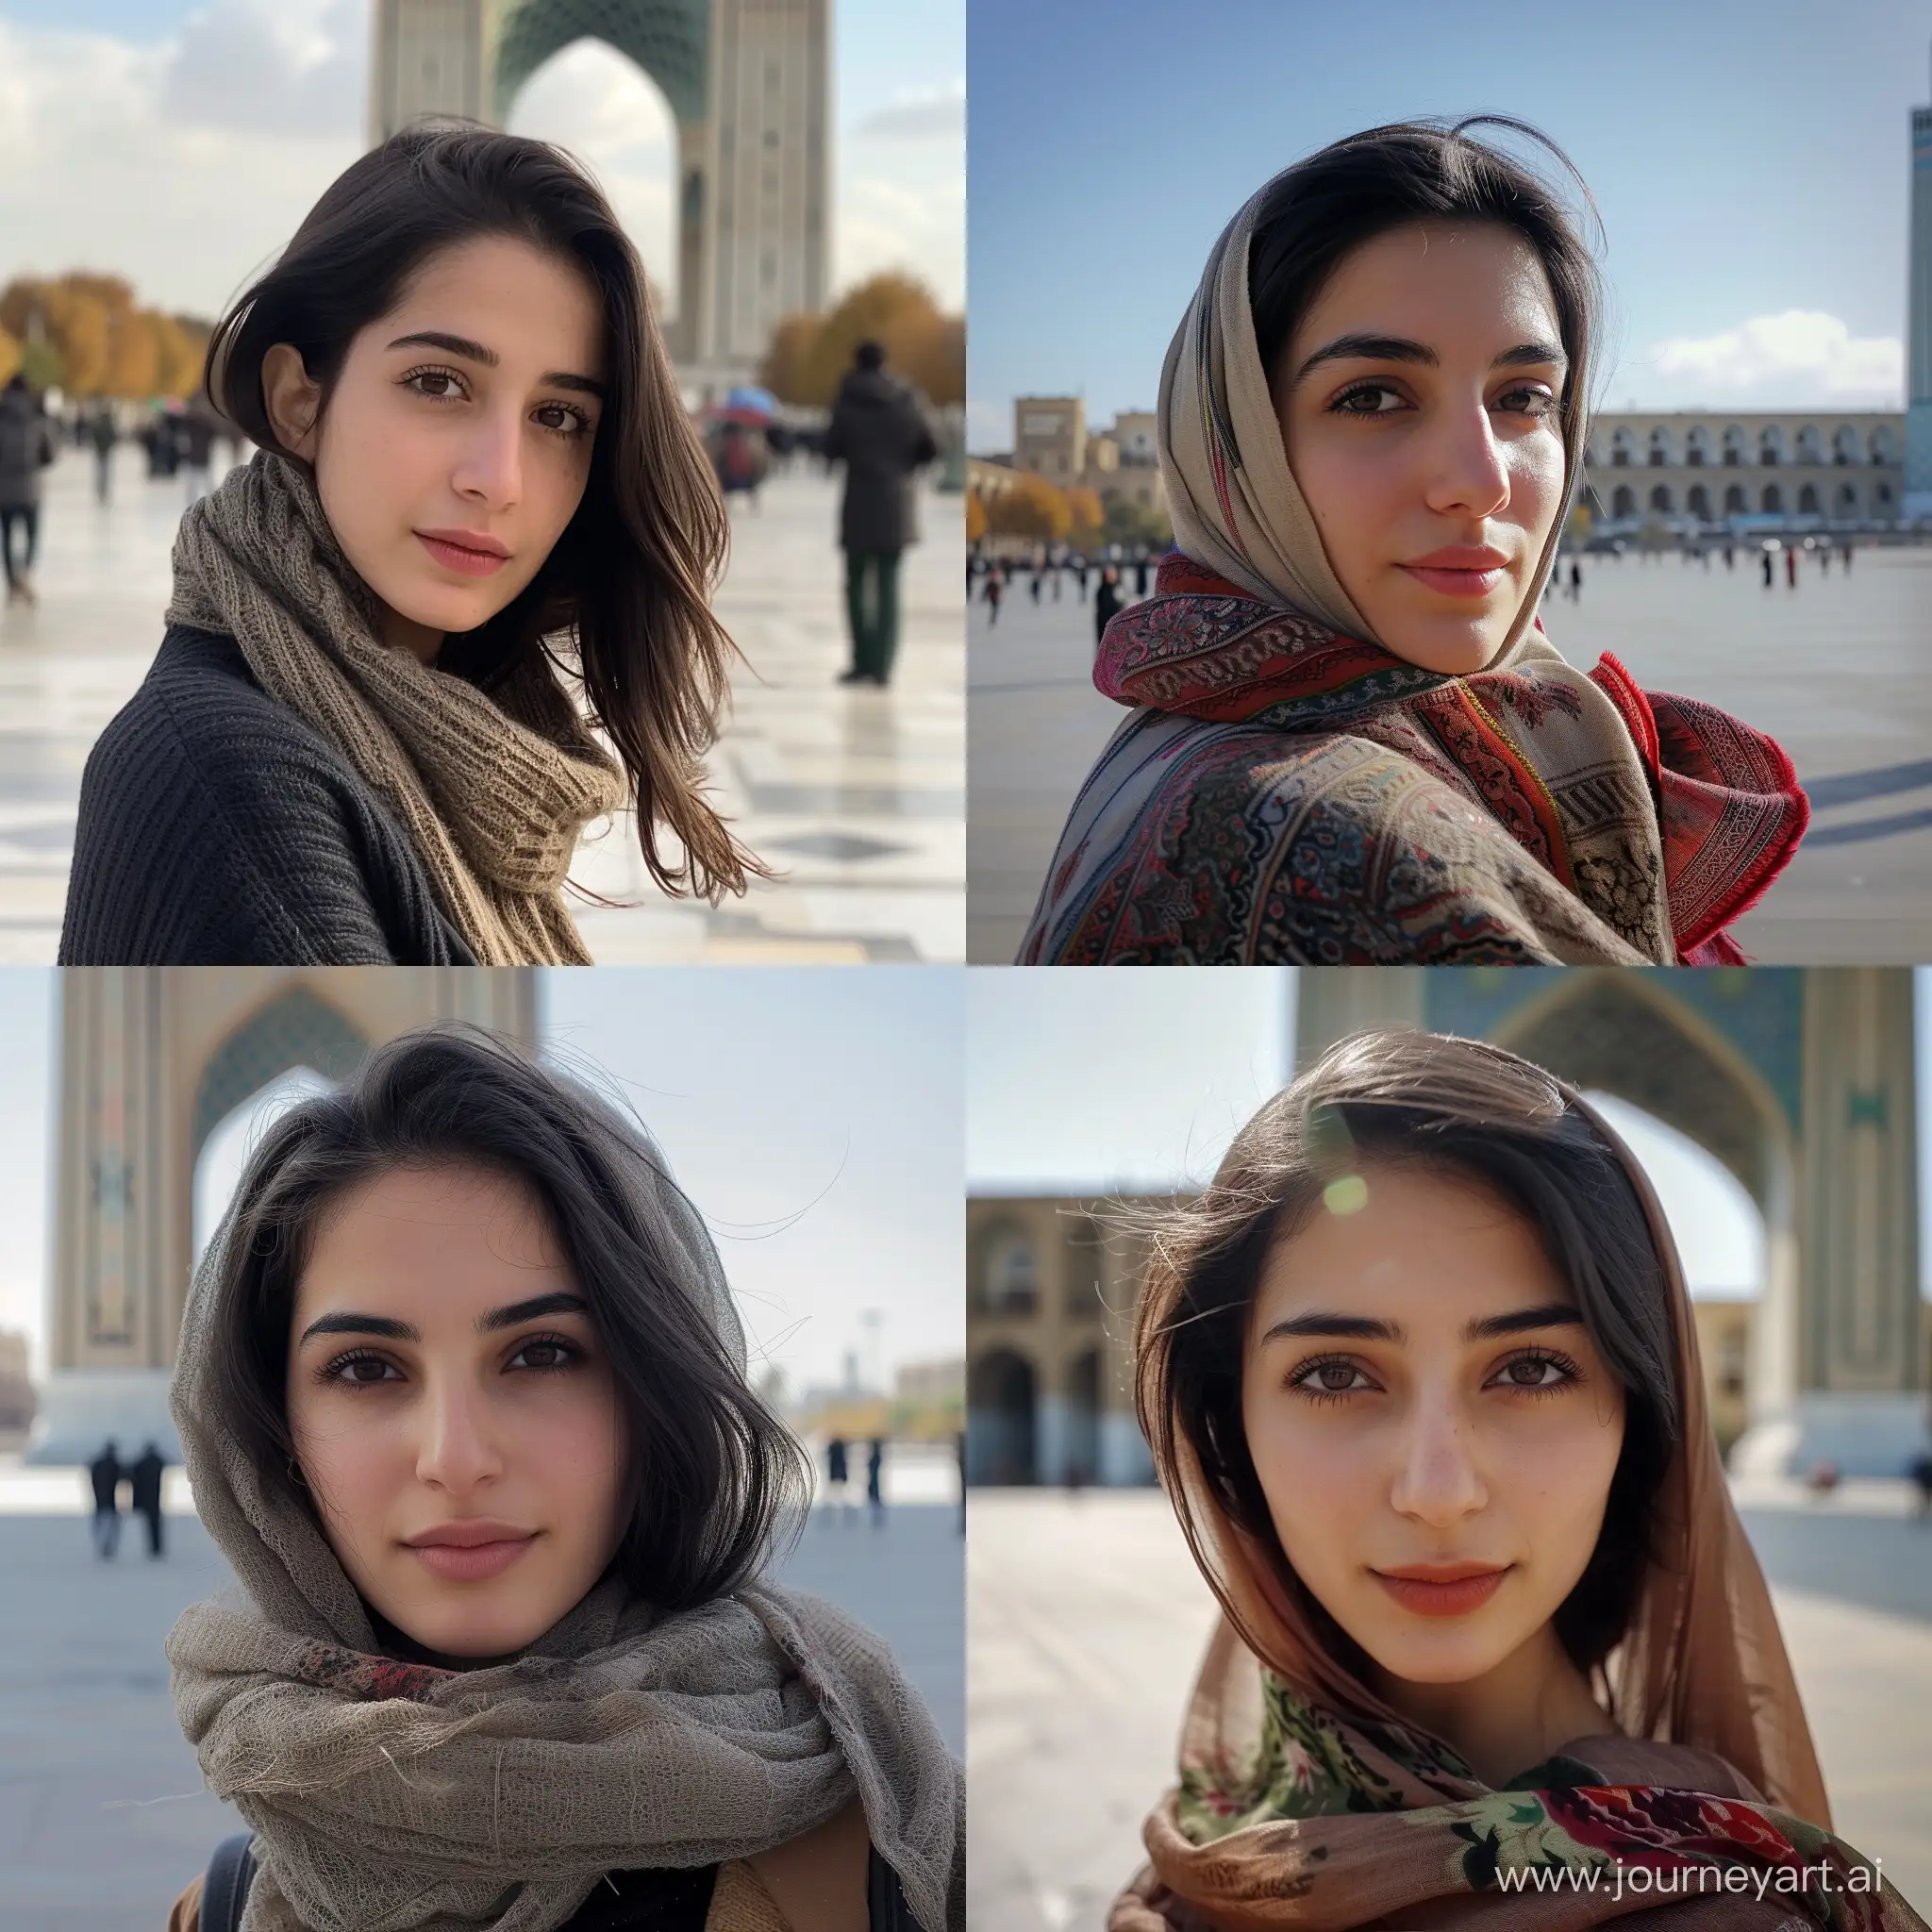 The beautiful Iranian girl is looking directly at the camera and the background is Tehran's Azadi Square